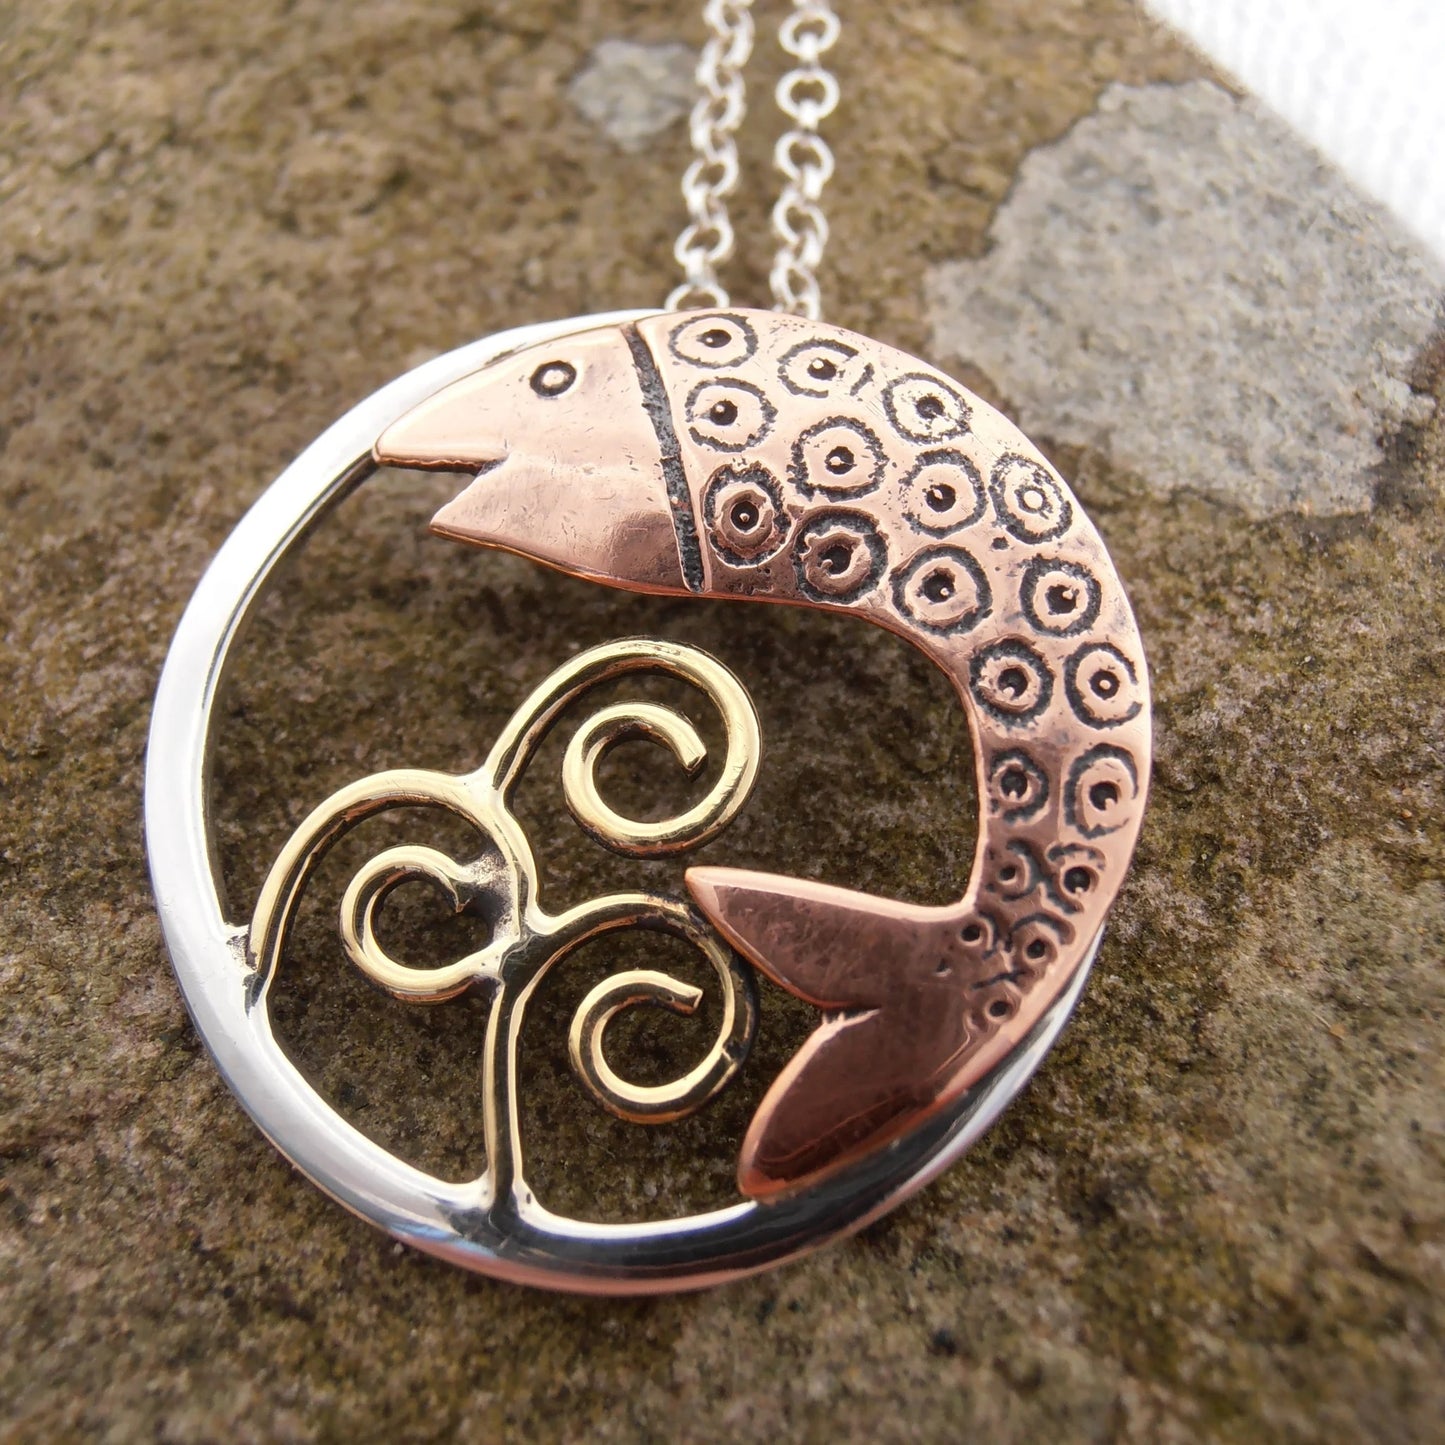 Salmon of Knowledge Pendant - Handmade in sterling silver, with brass spirals and a copper fish - circular design-